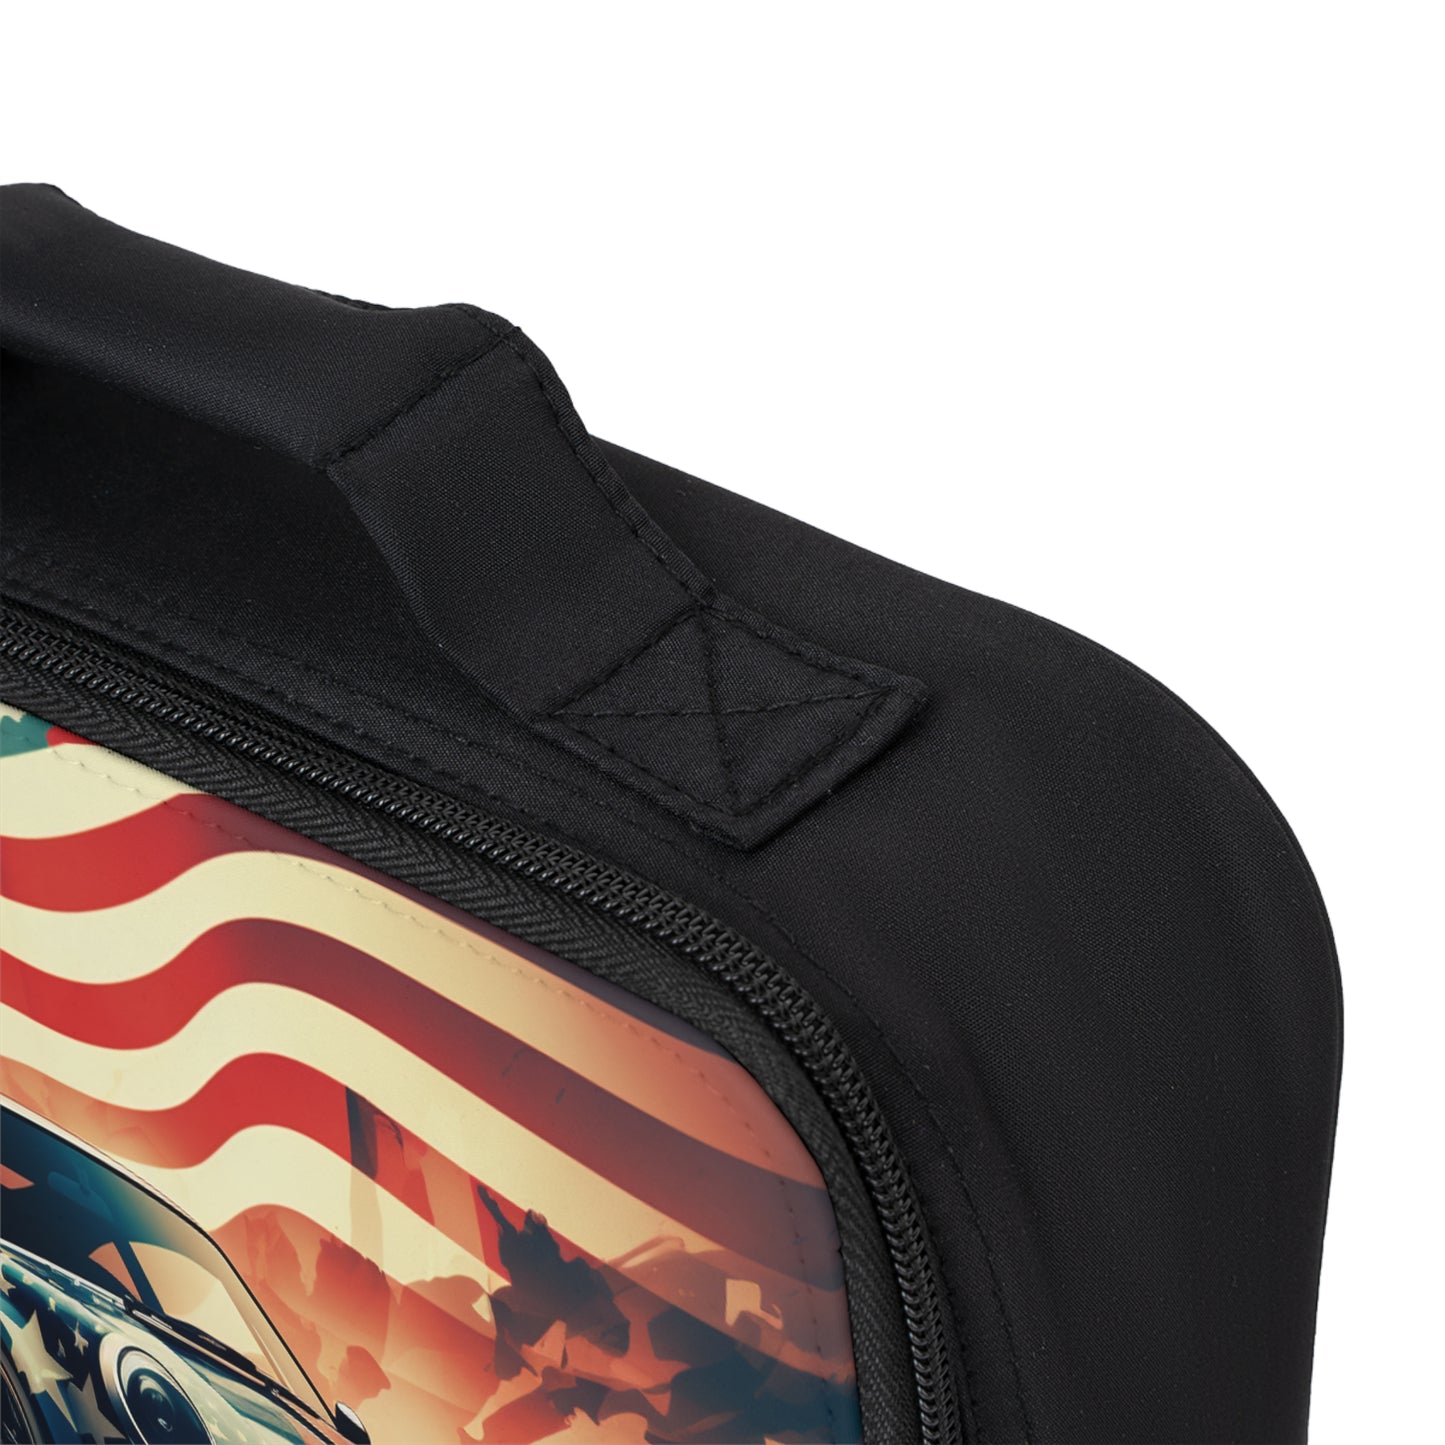 Lunch Bag Abstract American Flag Background Porsche 4